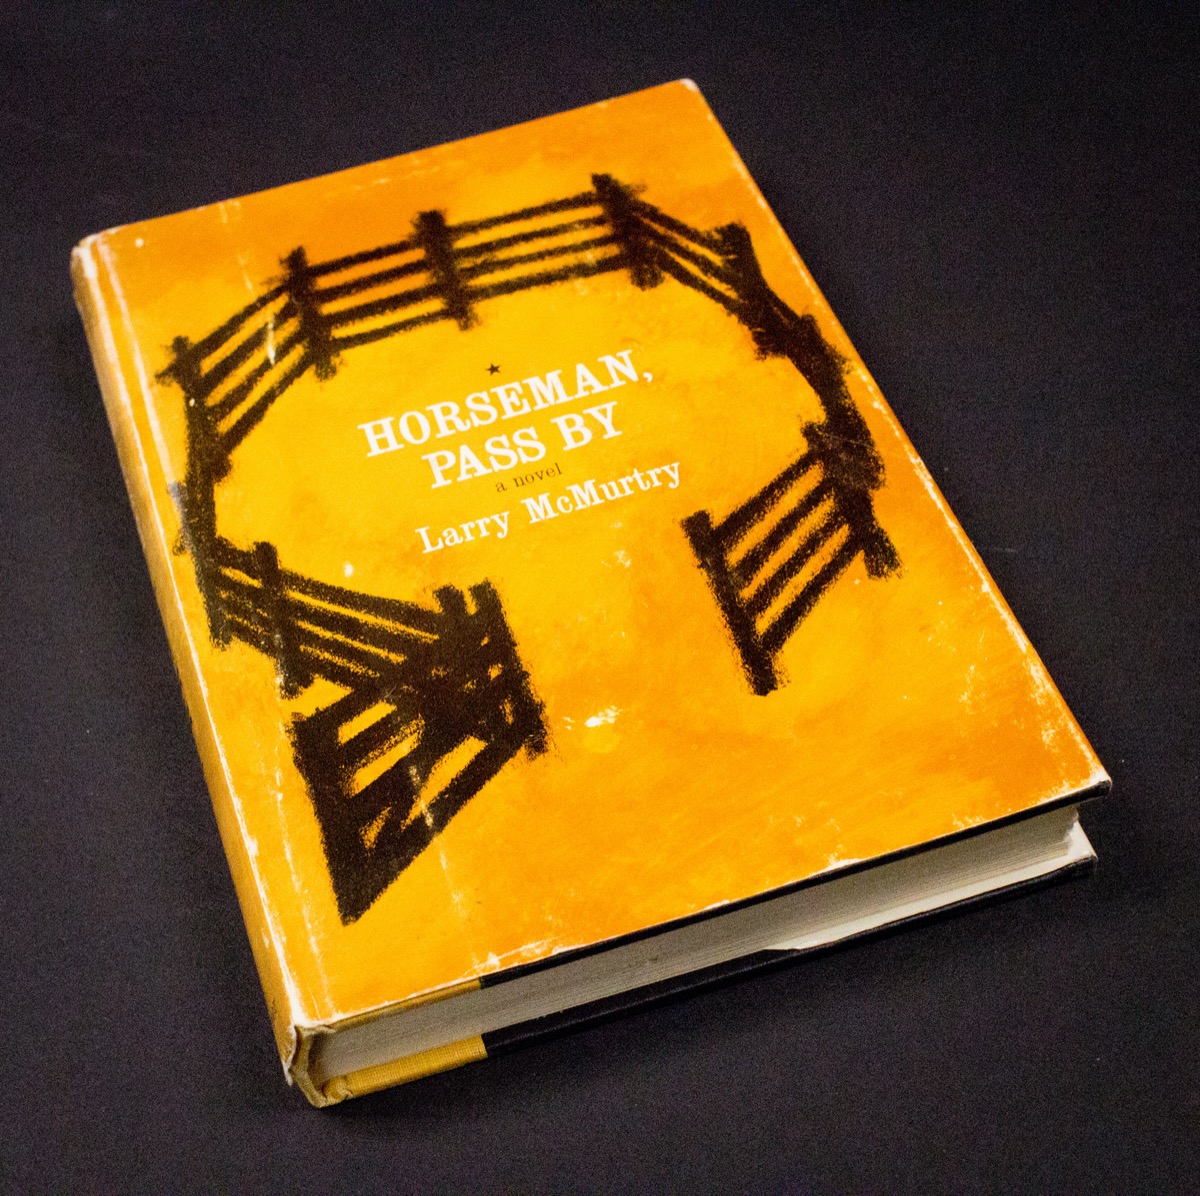 A yellow book with a circular fence, open and brown in color drawn on it. The title of the book is in the middle in white letter, with the author Larry McMurtry under it in white letters.